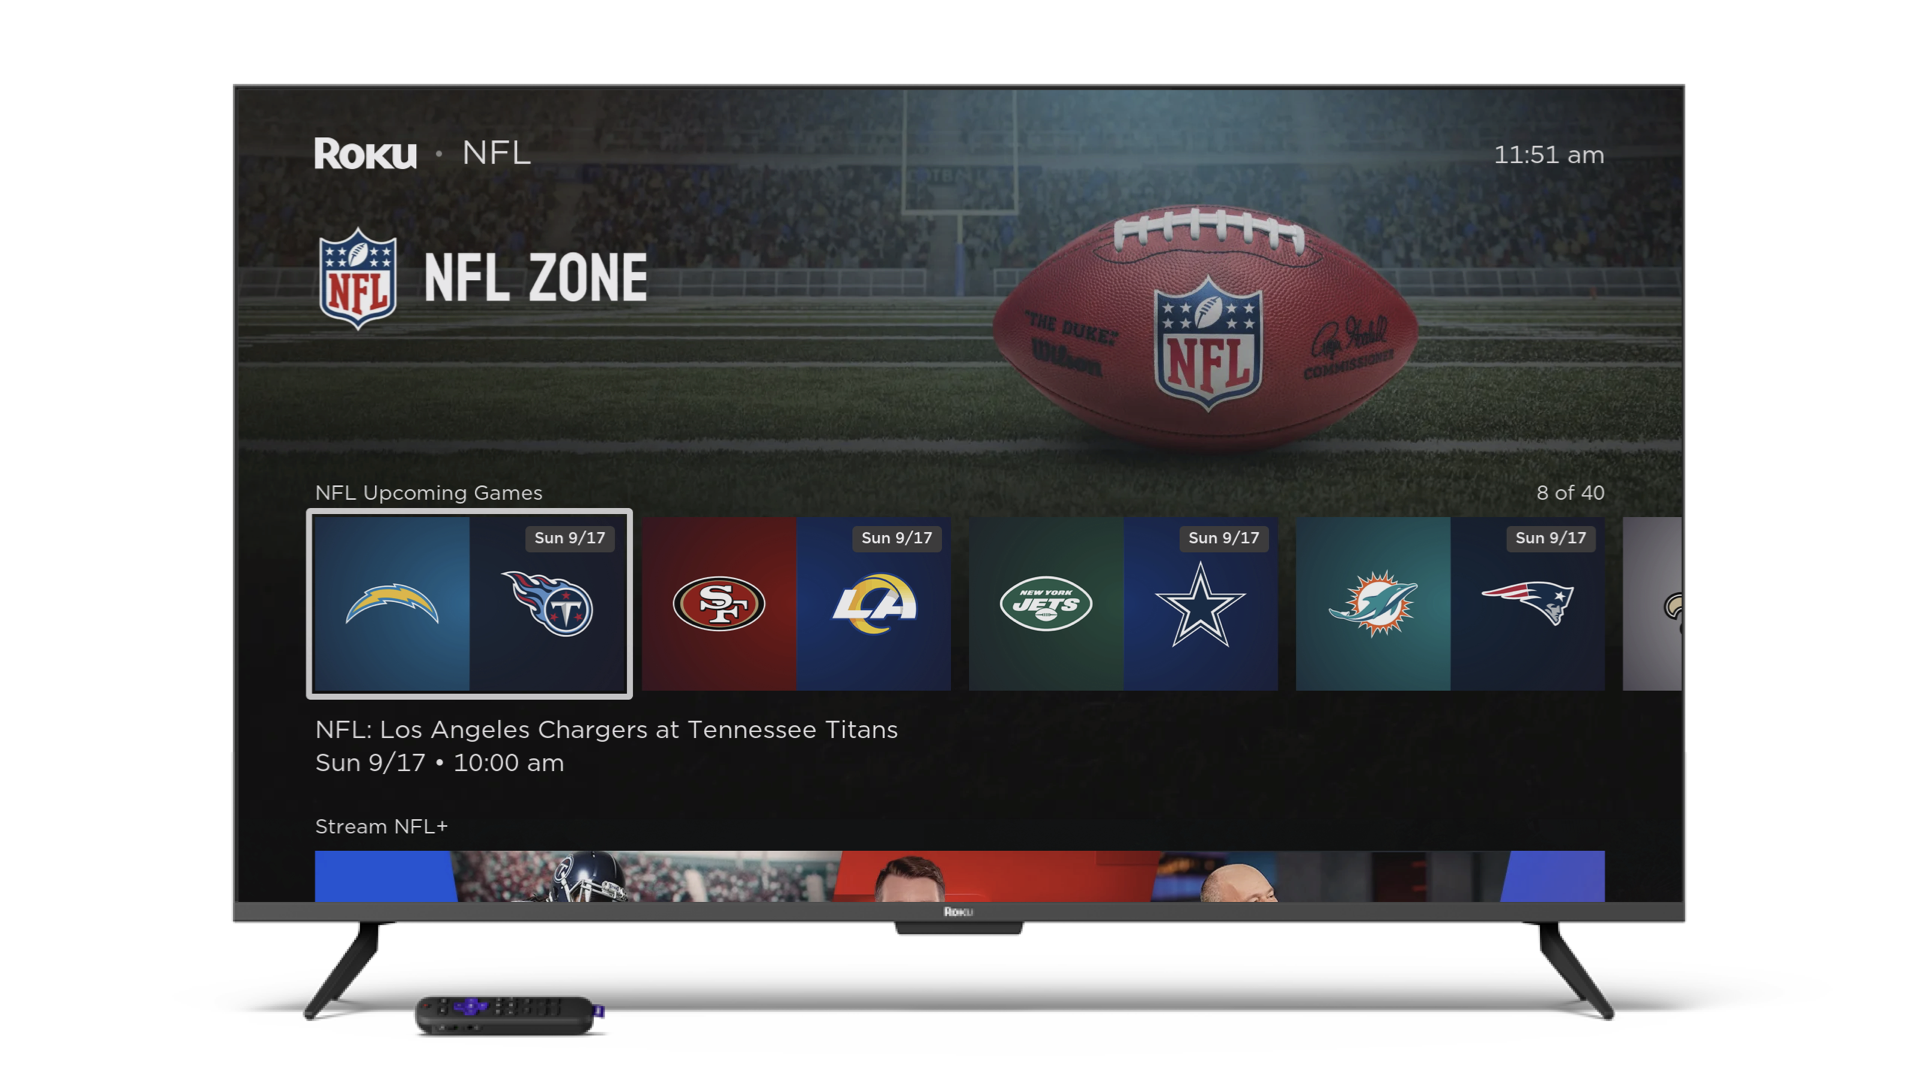 Roku Launches NFL Zone